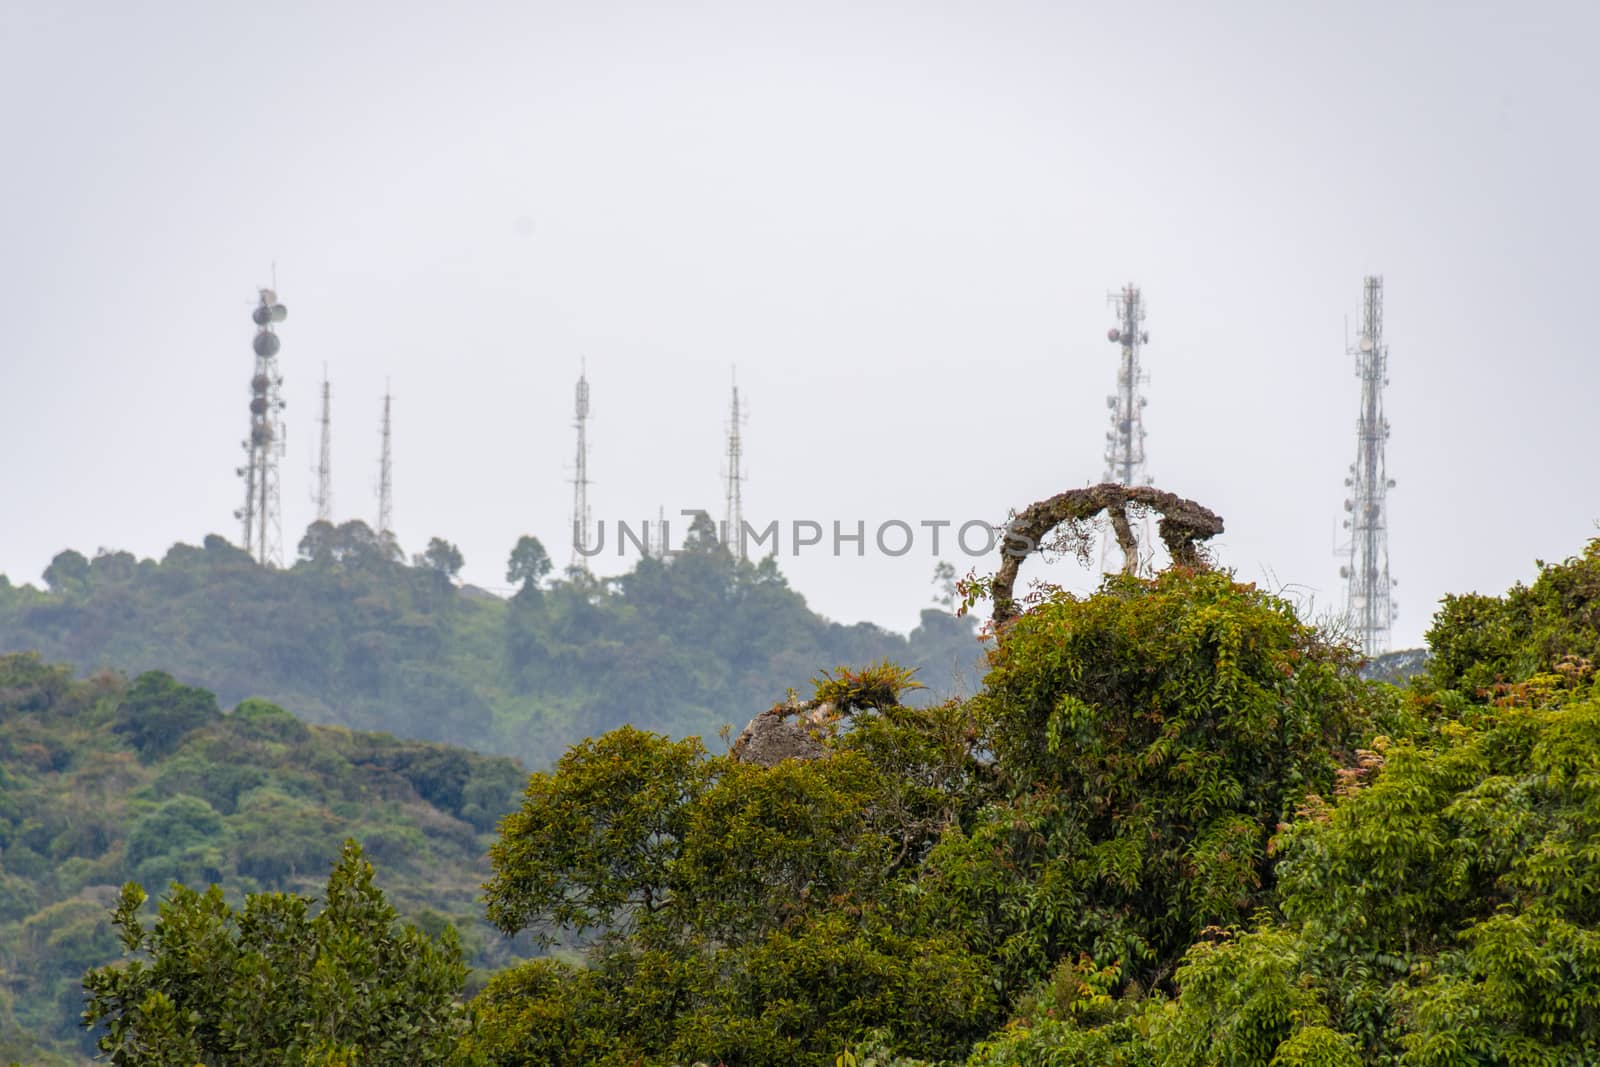 Tree tops of tropical rain forest in front of modern transmission towers by MXW_Stock